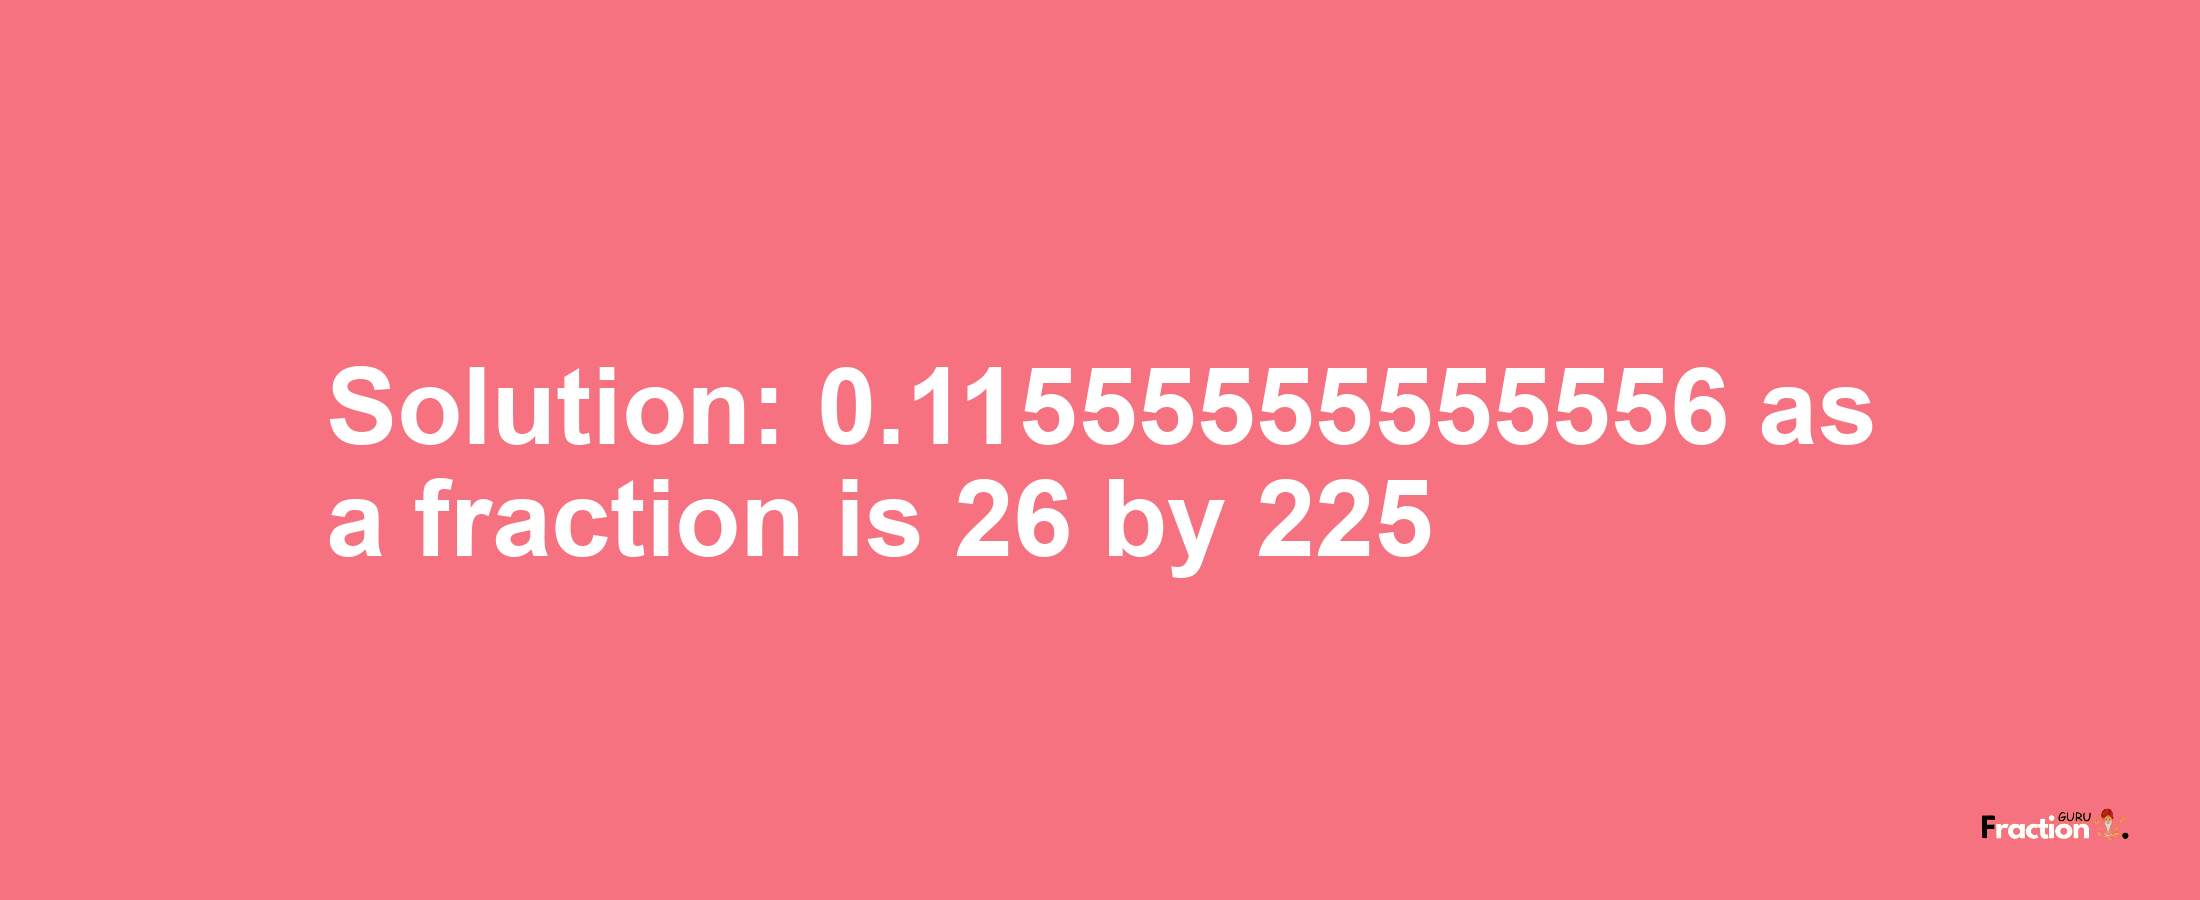 Solution:0.11555555555556 as a fraction is 26/225